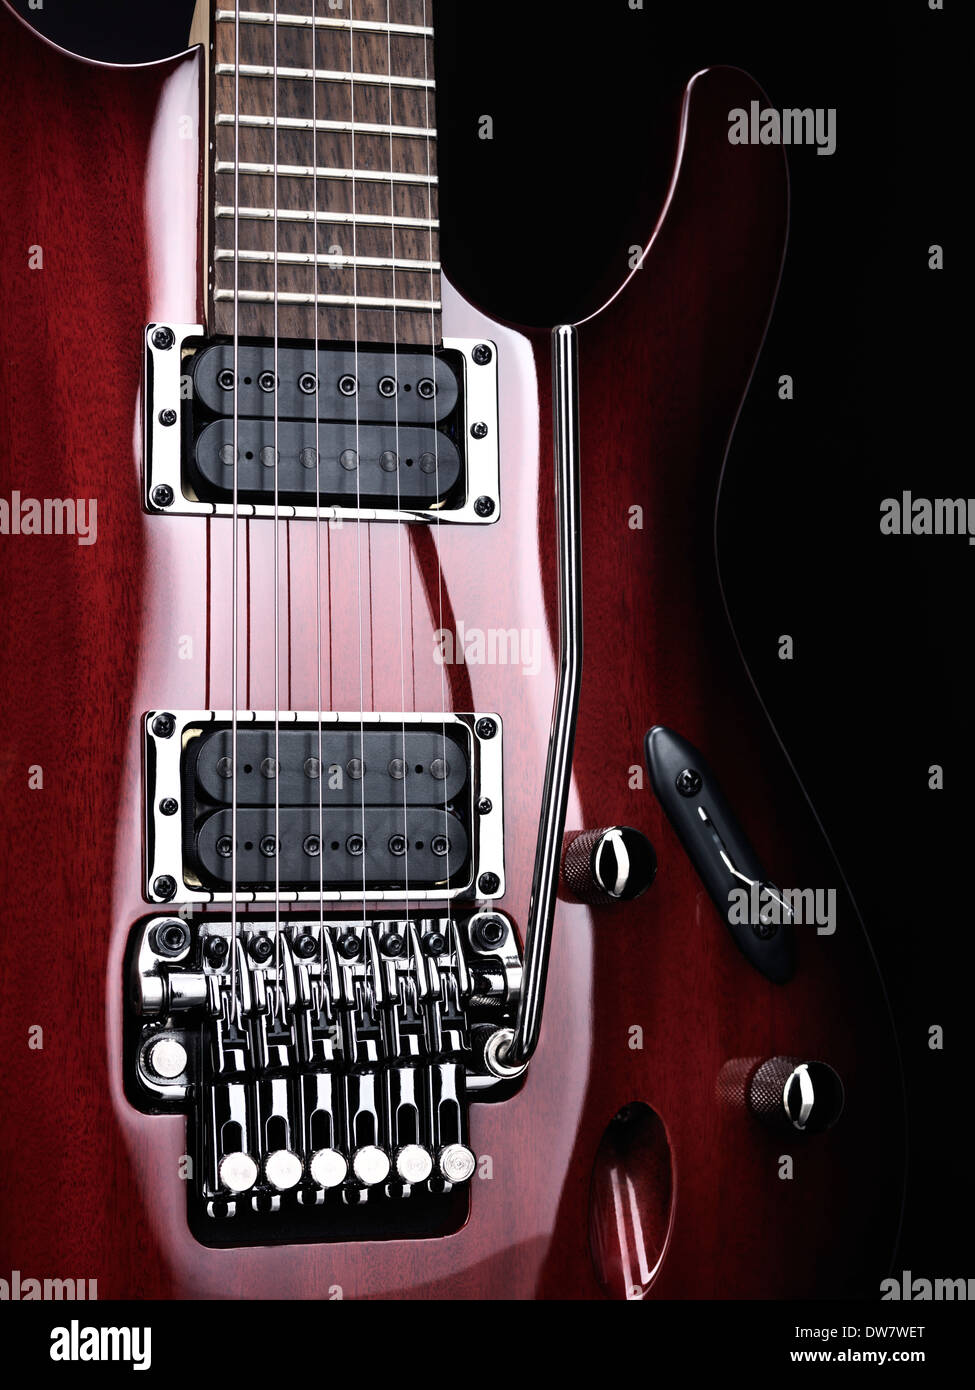 Artistic closeup of red electric guitar Ibanez with chrome parts on black background Stock Photo